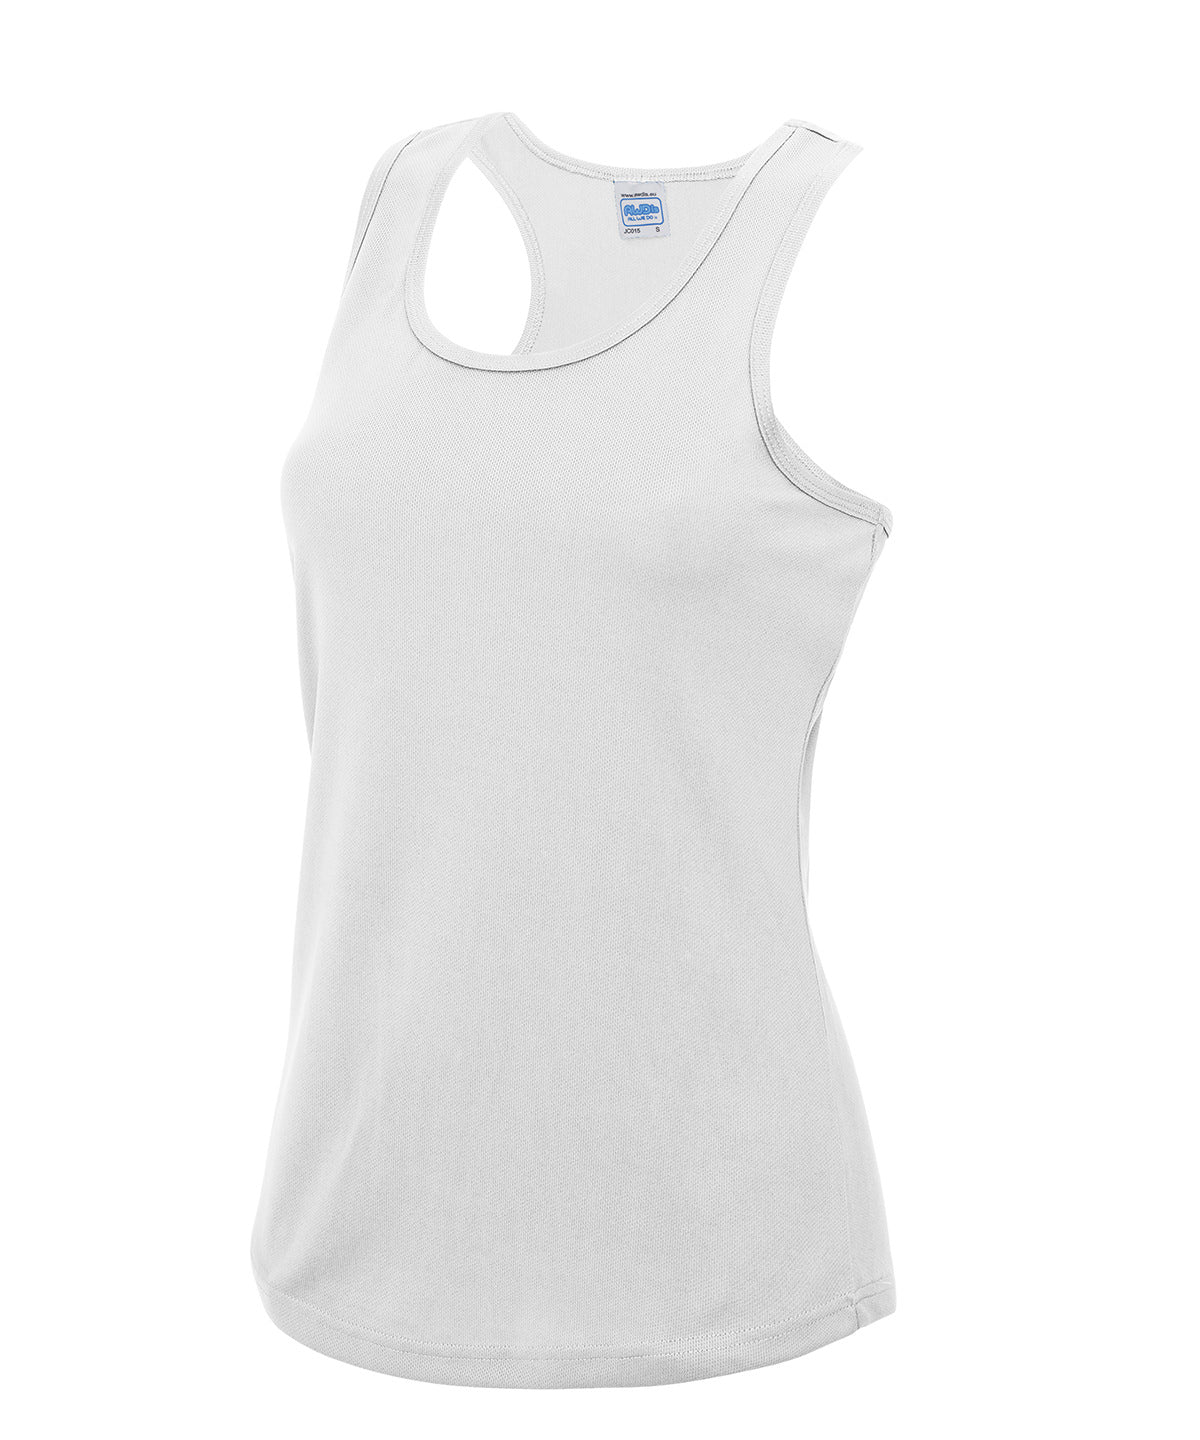 Personalised Vests - White AWDis Just Cool Women's cool vest